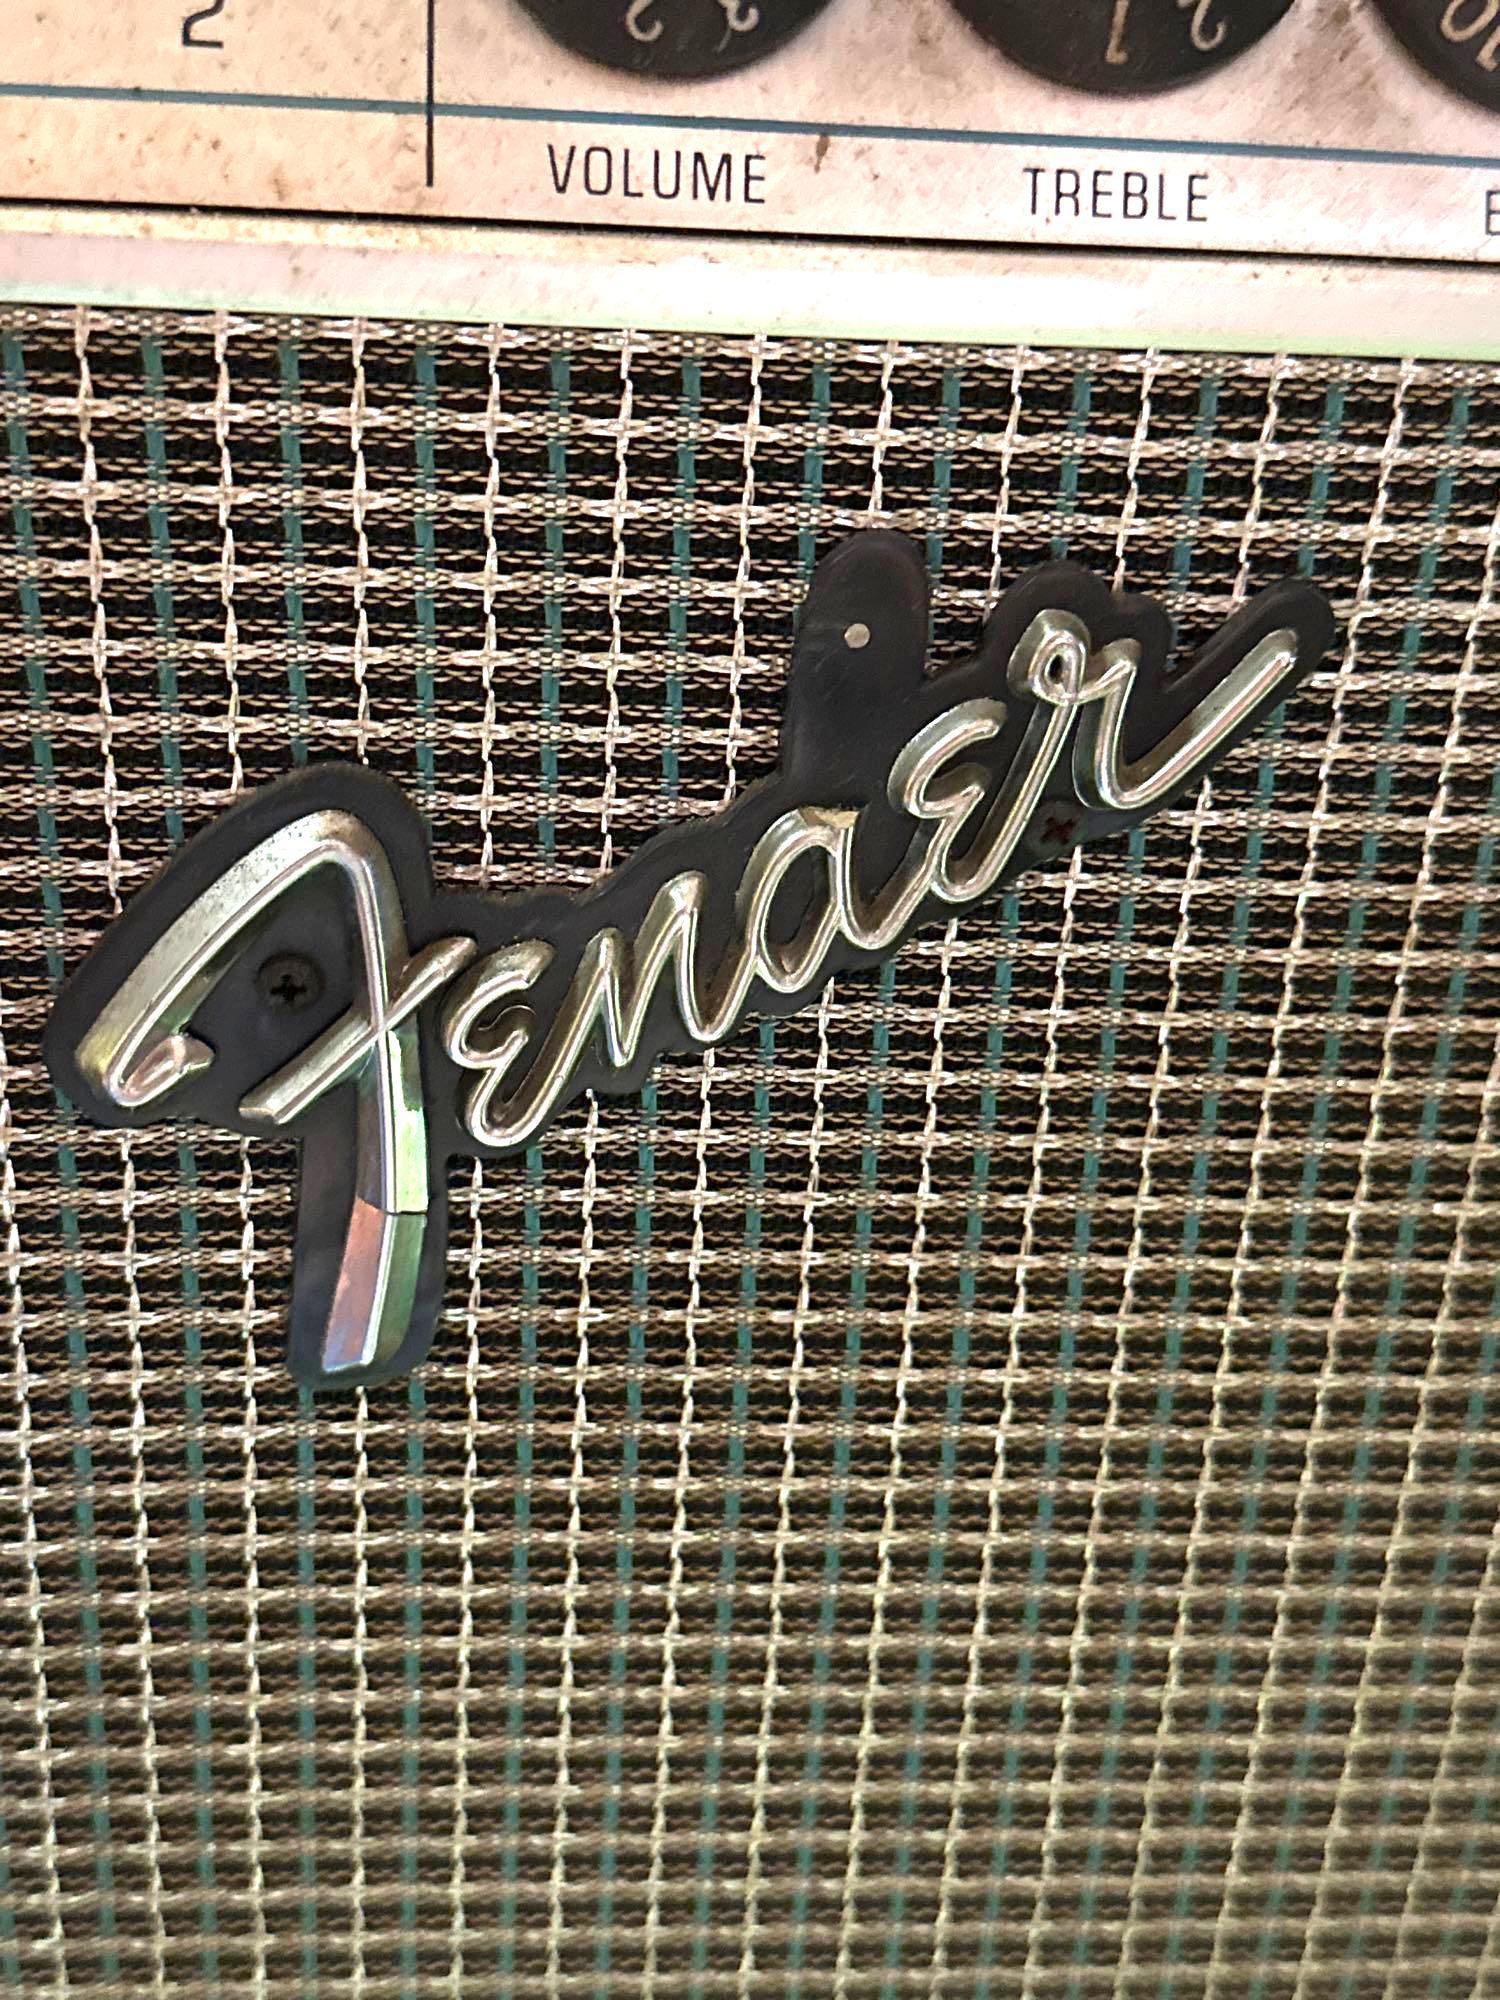 Vintage Fender Vibro Champ AMP- AS IS